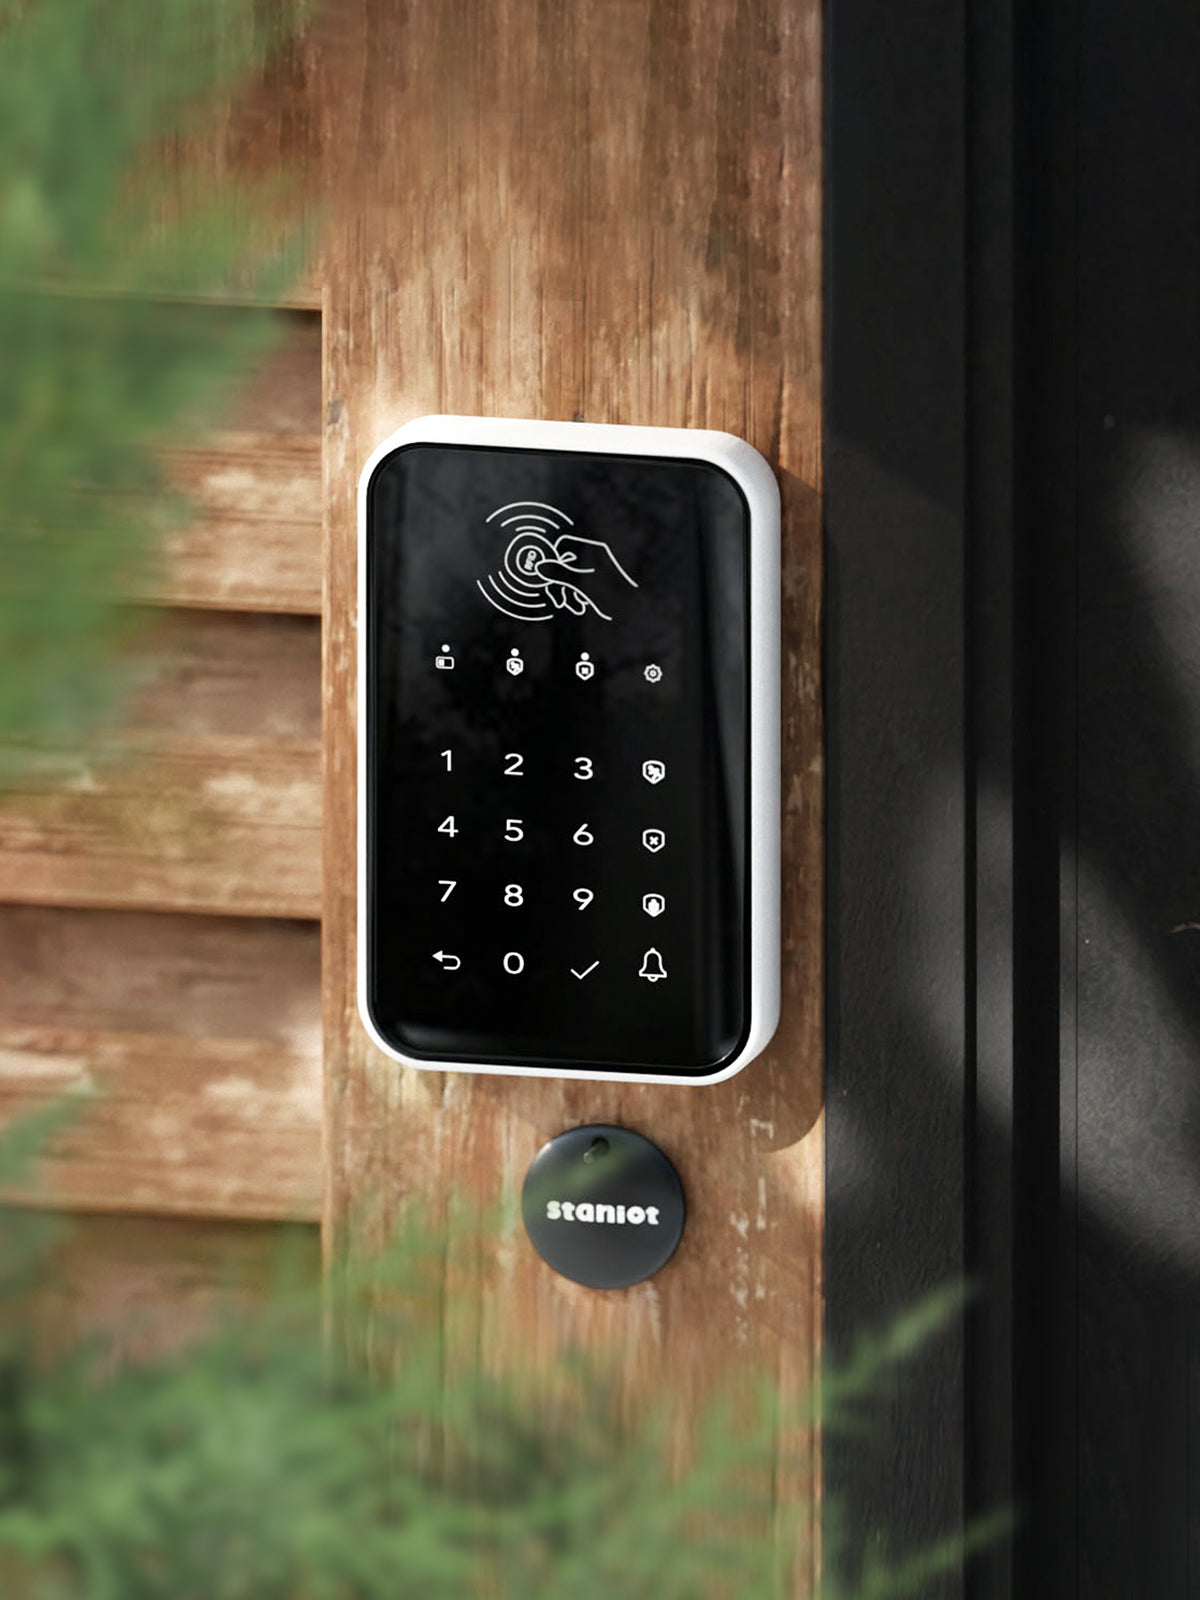 Staniot K010, RFID Wireless Alarm Touch Pad near home door entry with green vegetation on the far left